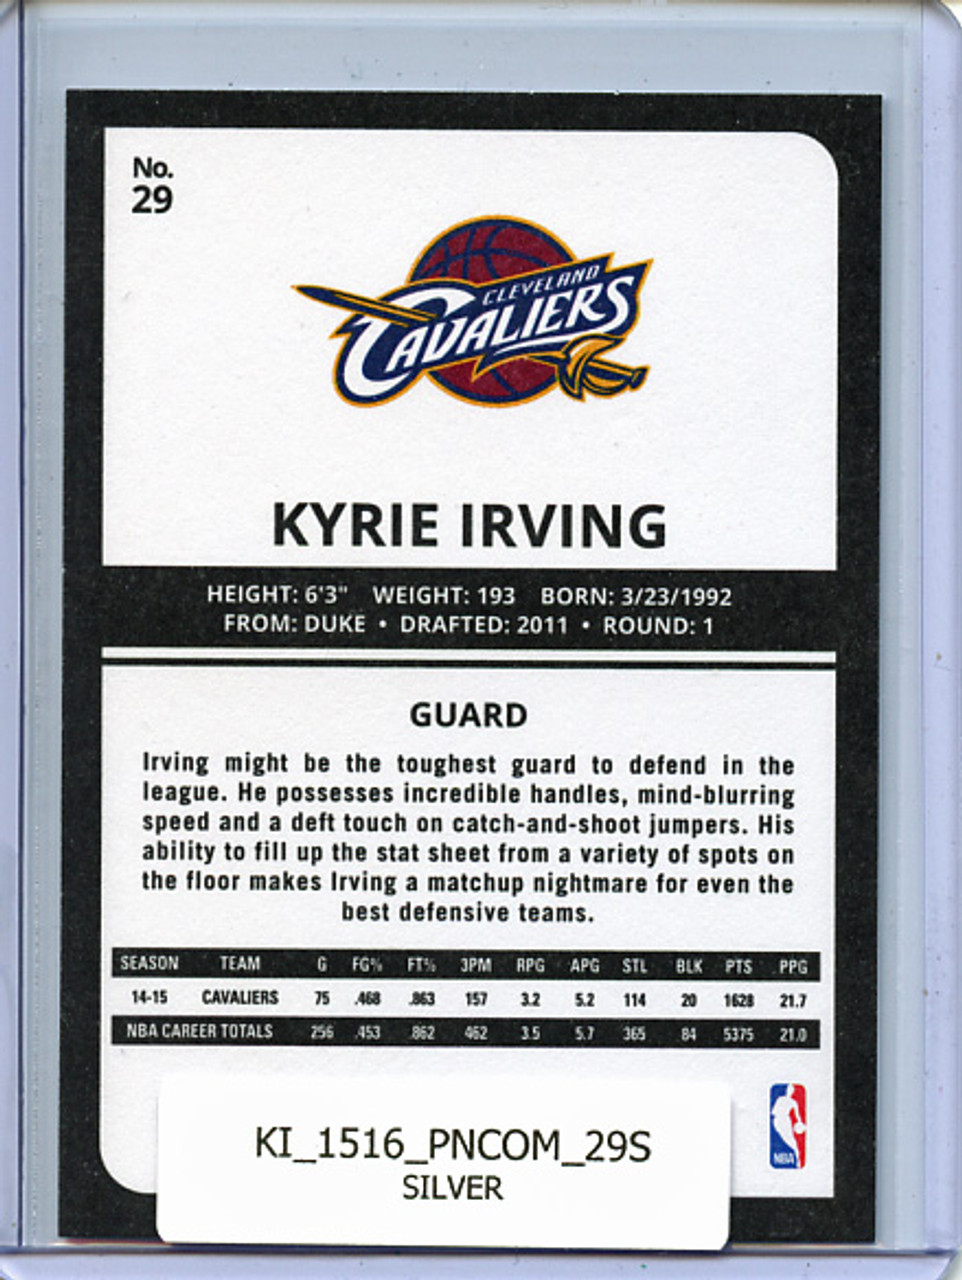 Kyrie Irving 2015-16 Complete #29 Silver